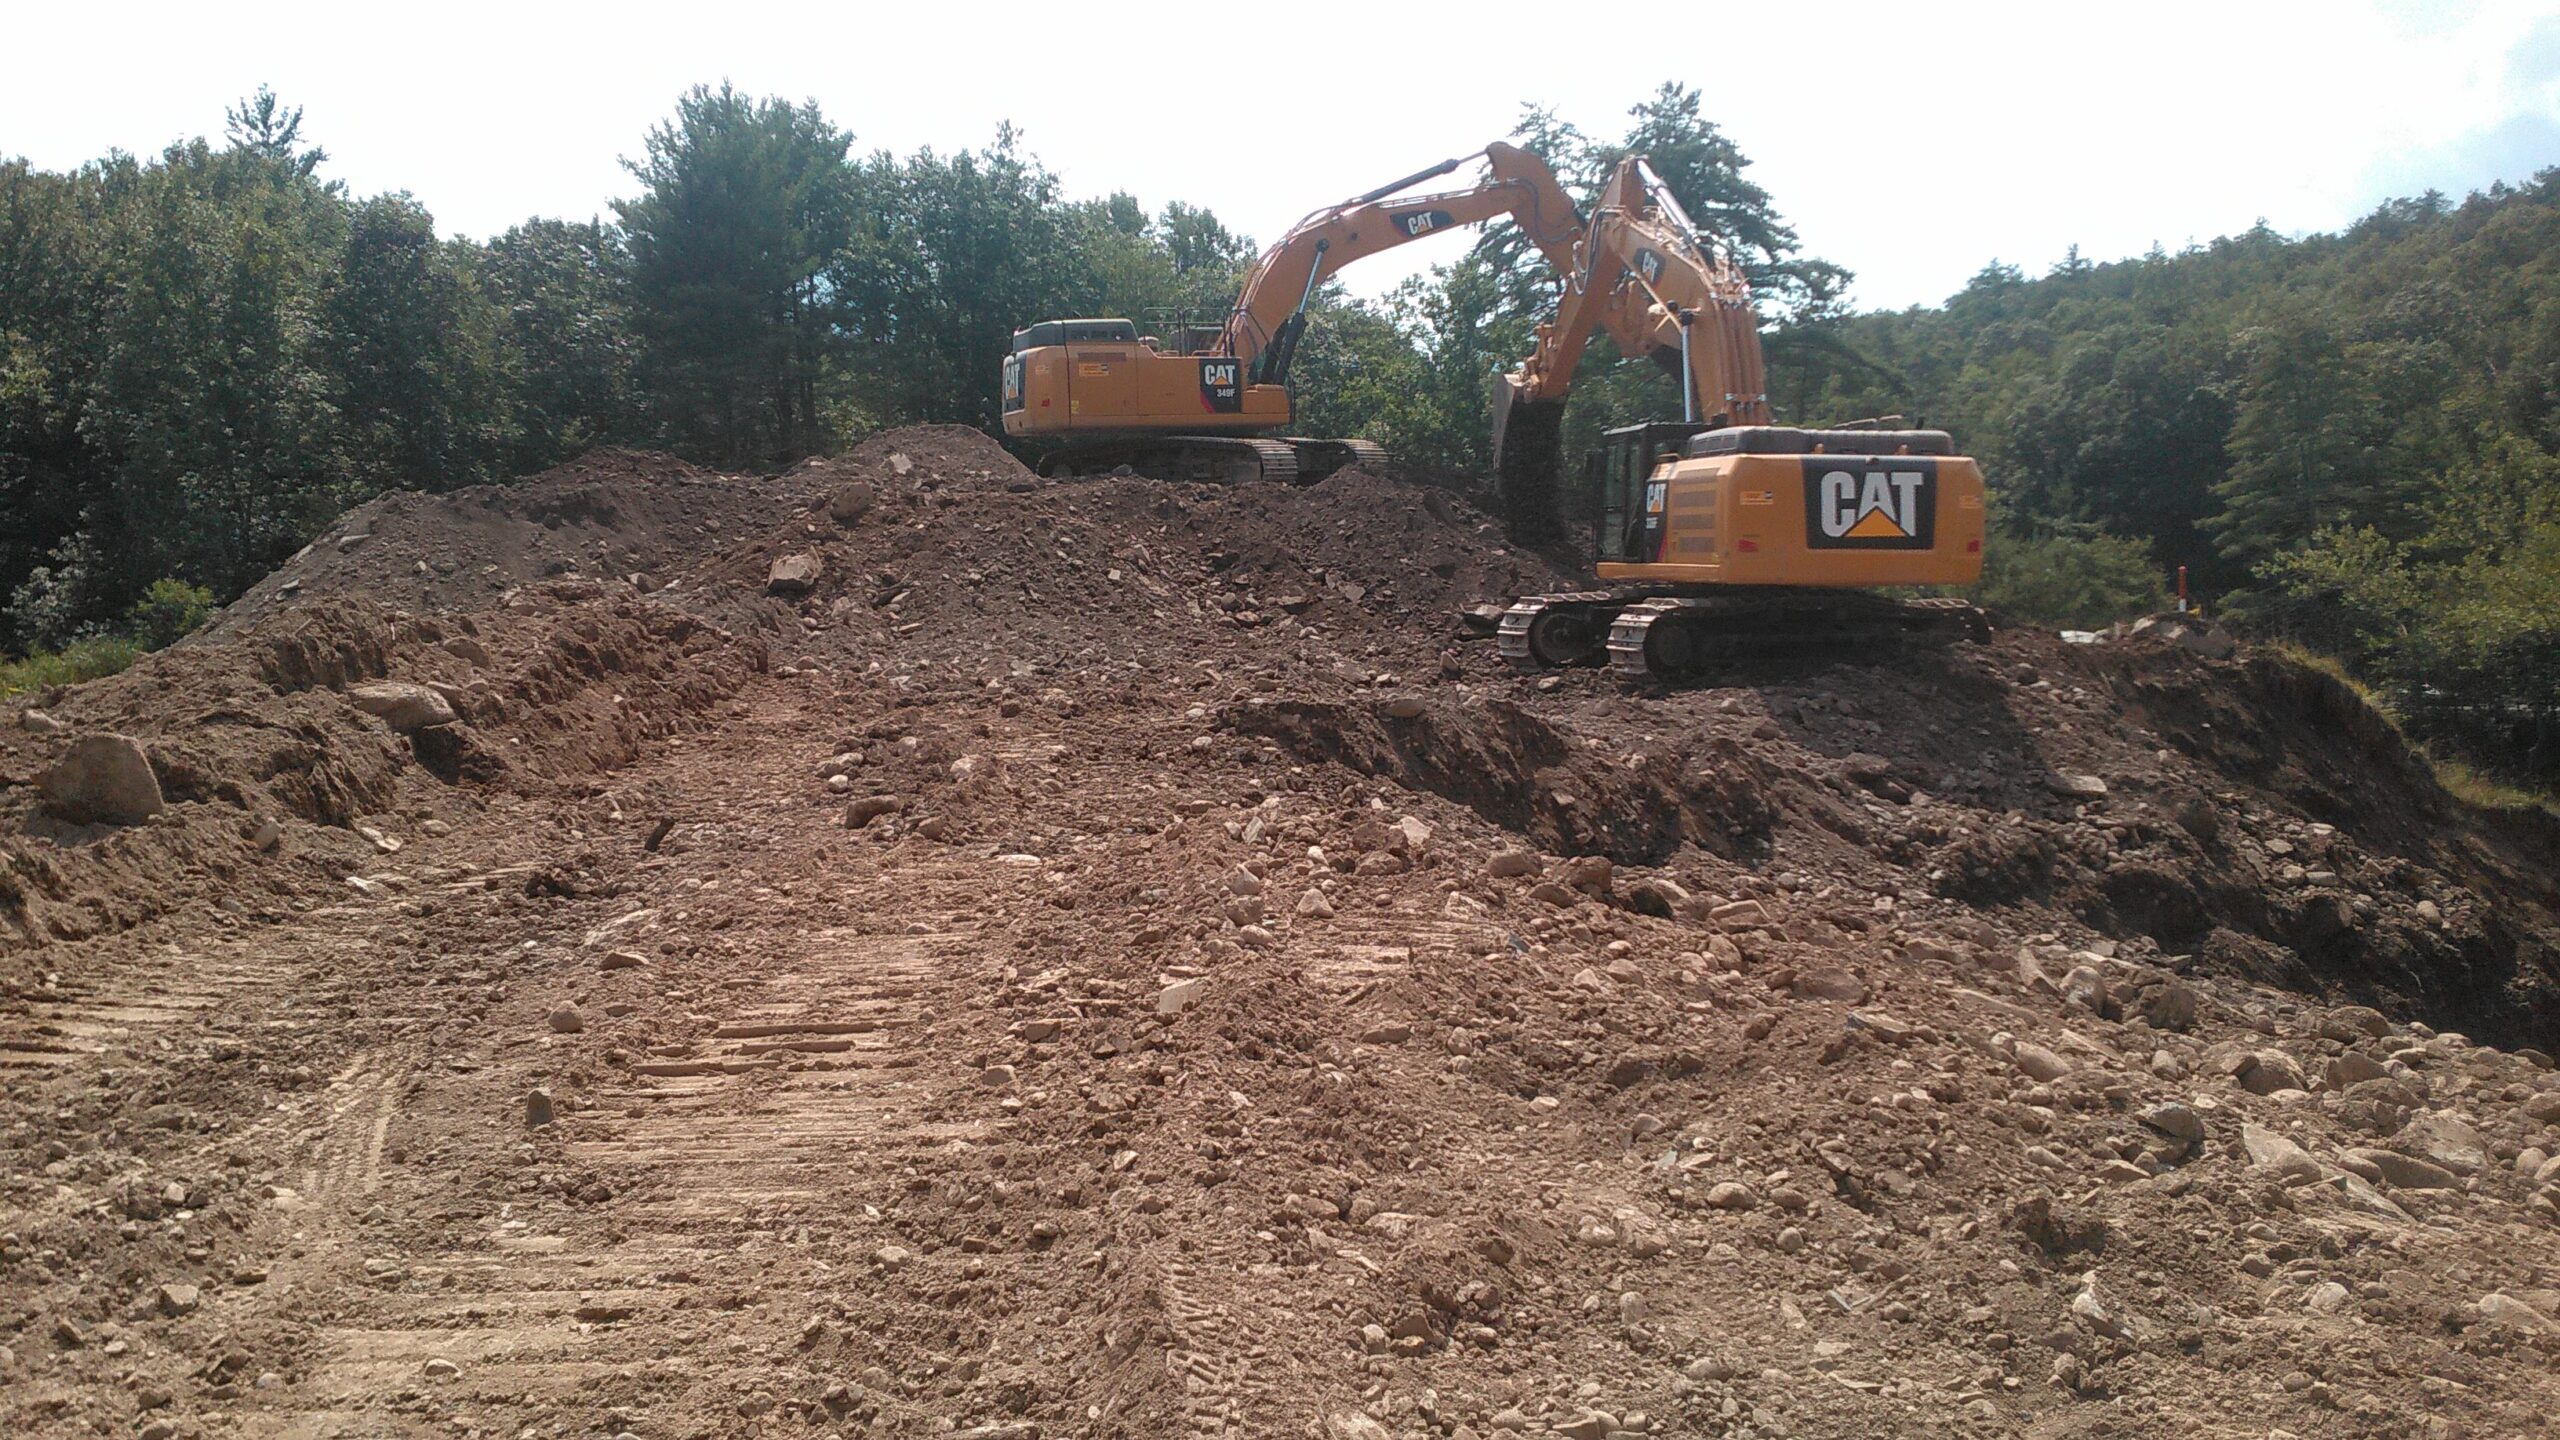 Two excavators digging on a mound of soil